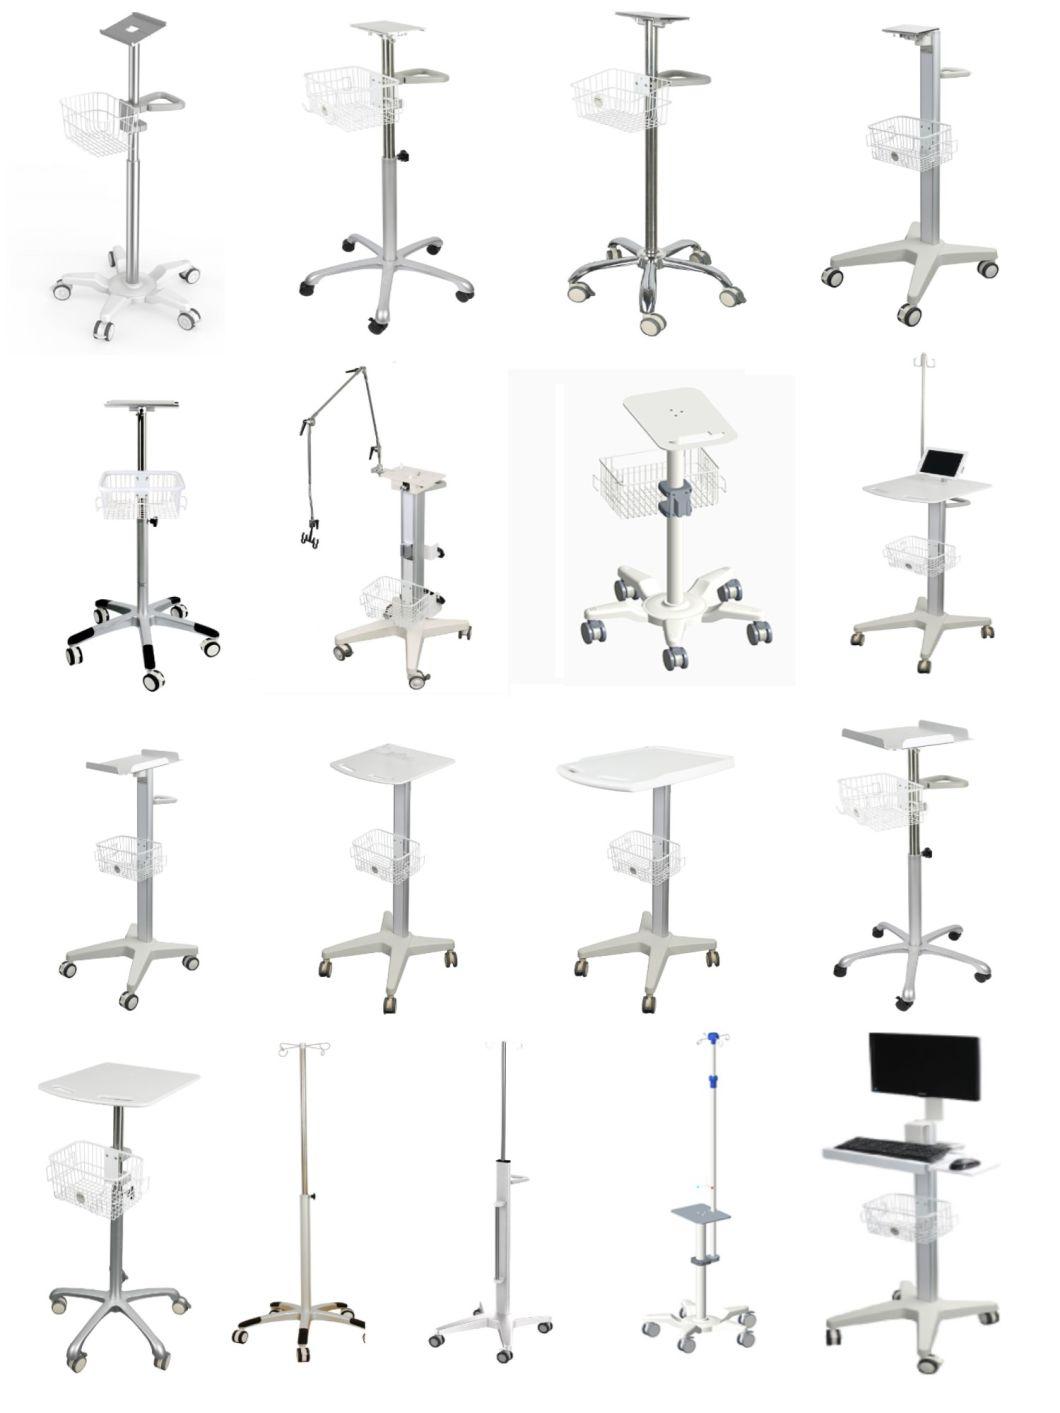 Hospital Mobile Working Stations Mobile Medical Products Laptop Cart Patient Monitor Trolley